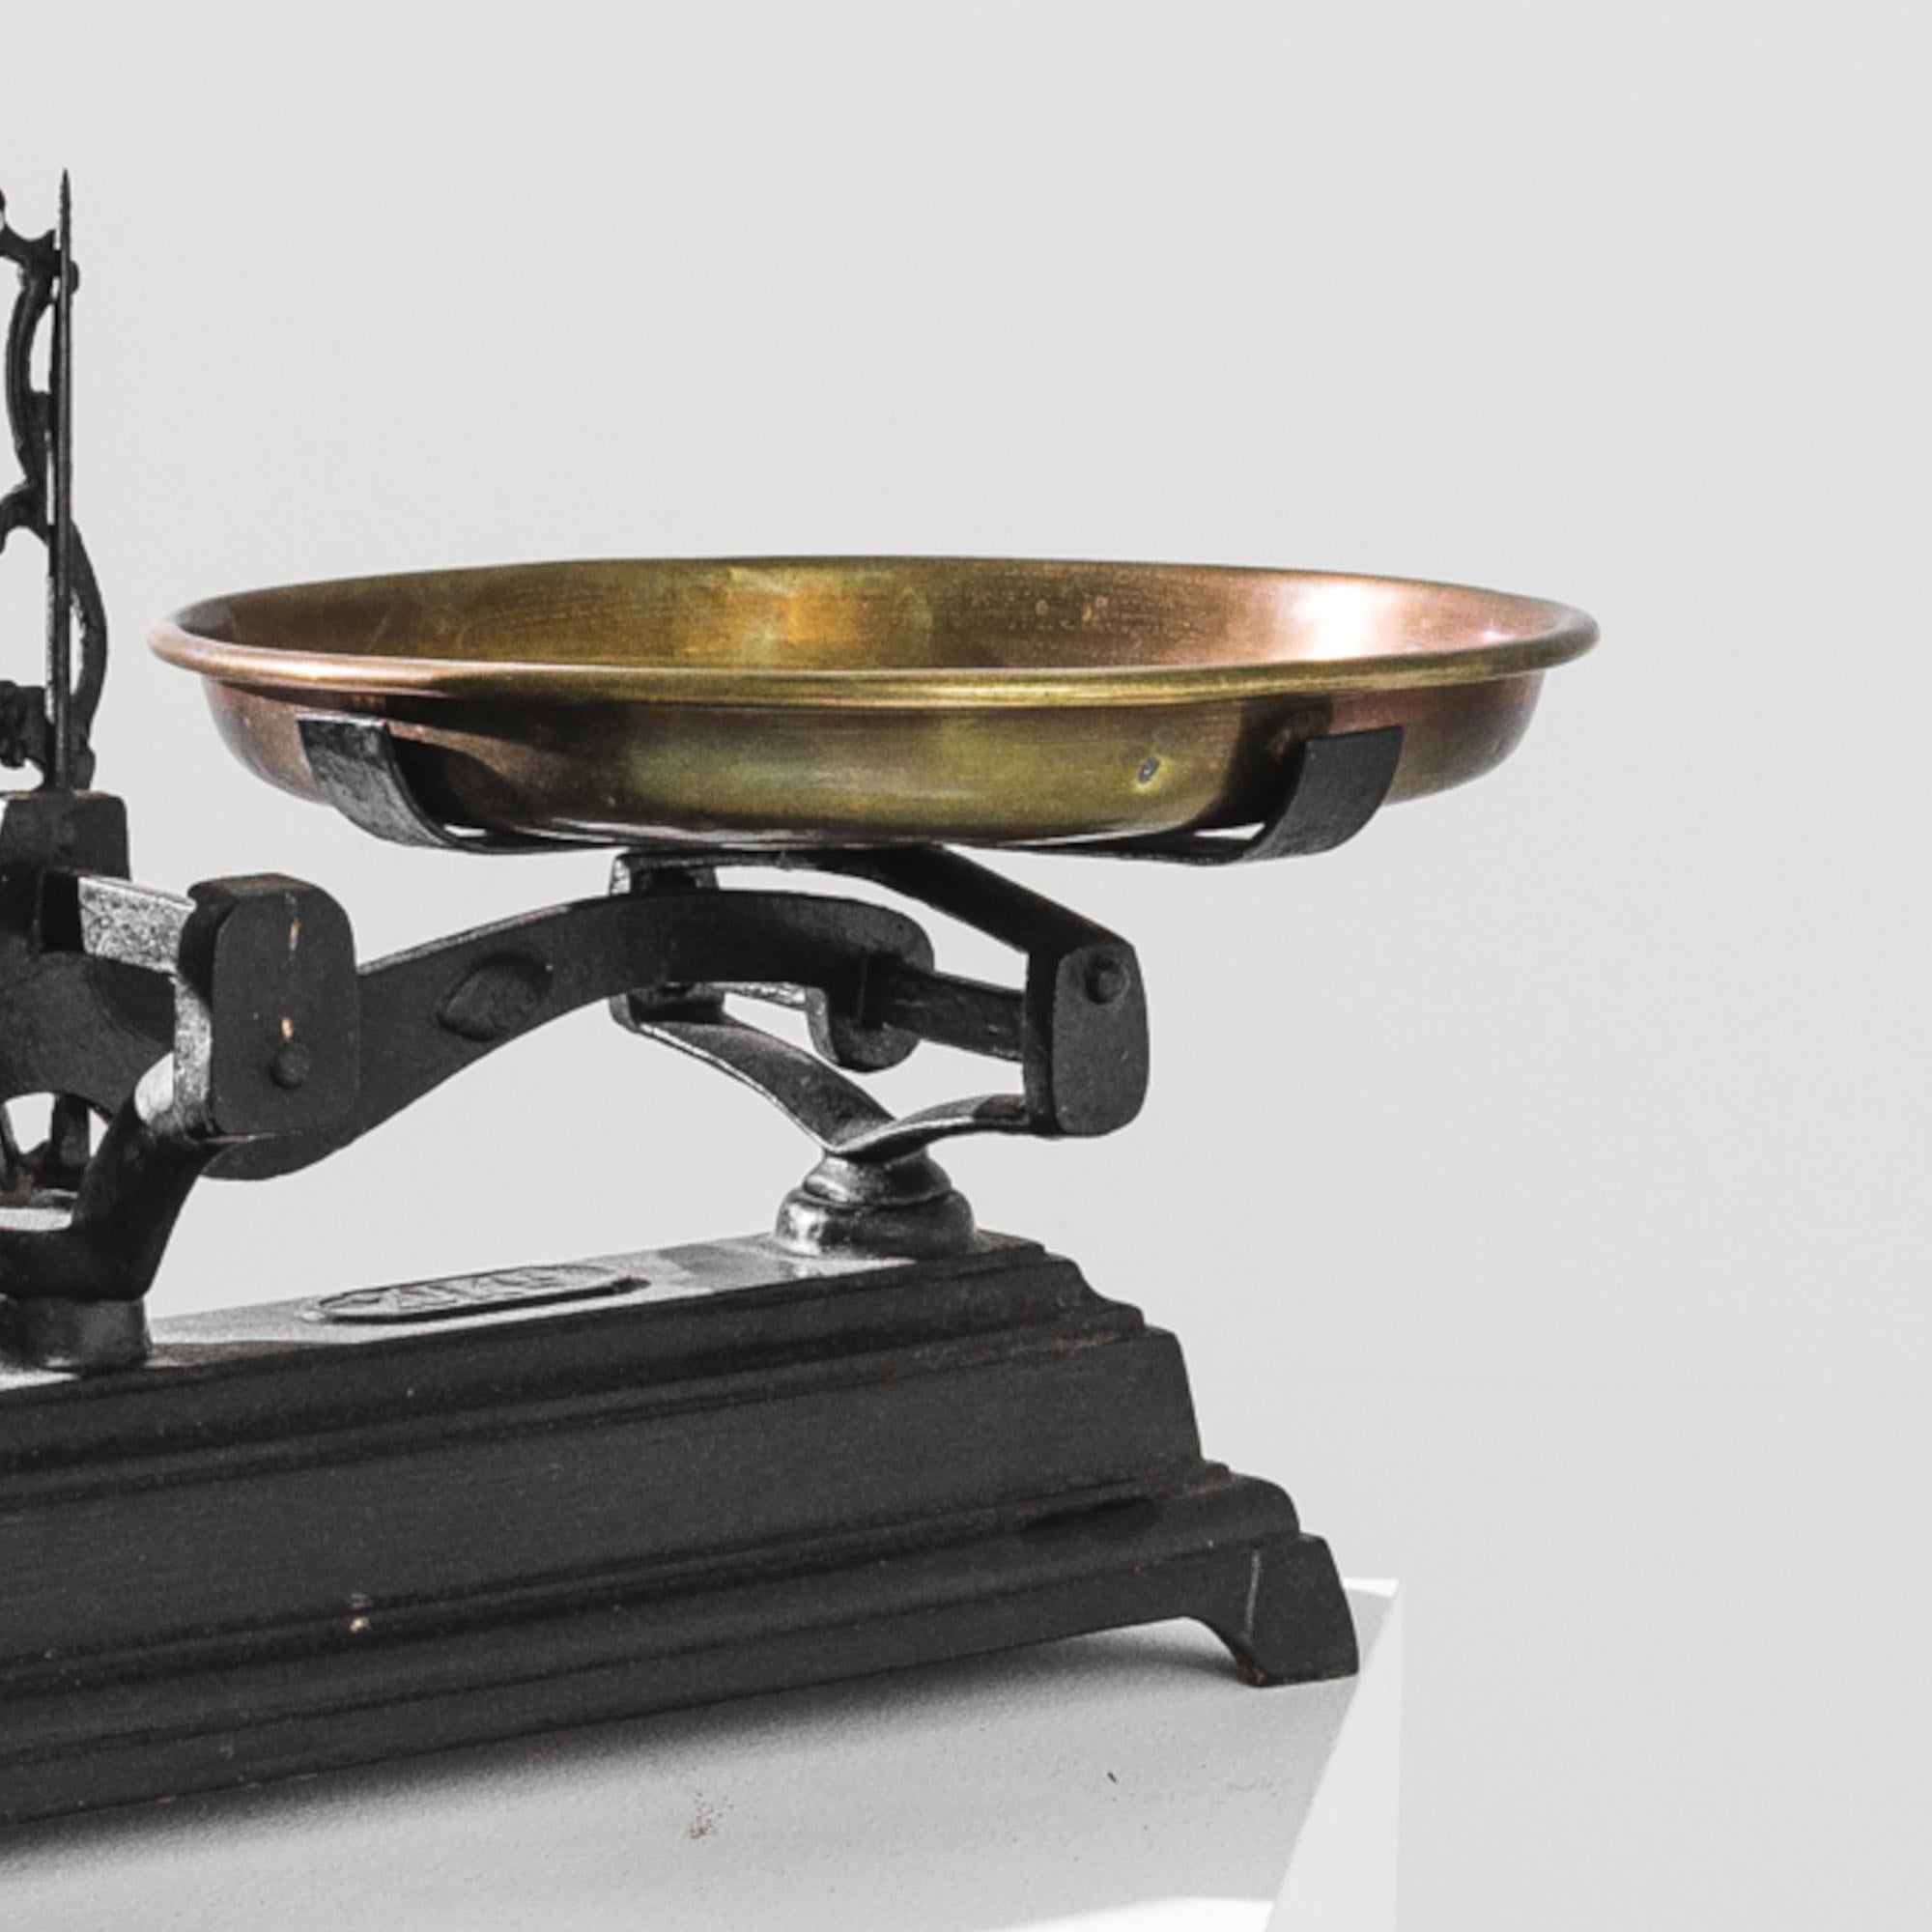 This vintage scale was produced in France, circa 1900. A household classic from the Roberval brand, this cast iron Force model can weigh up to 20kg. Fully functional, the scale is supplied with the original brass weighing pans, one of them shaped